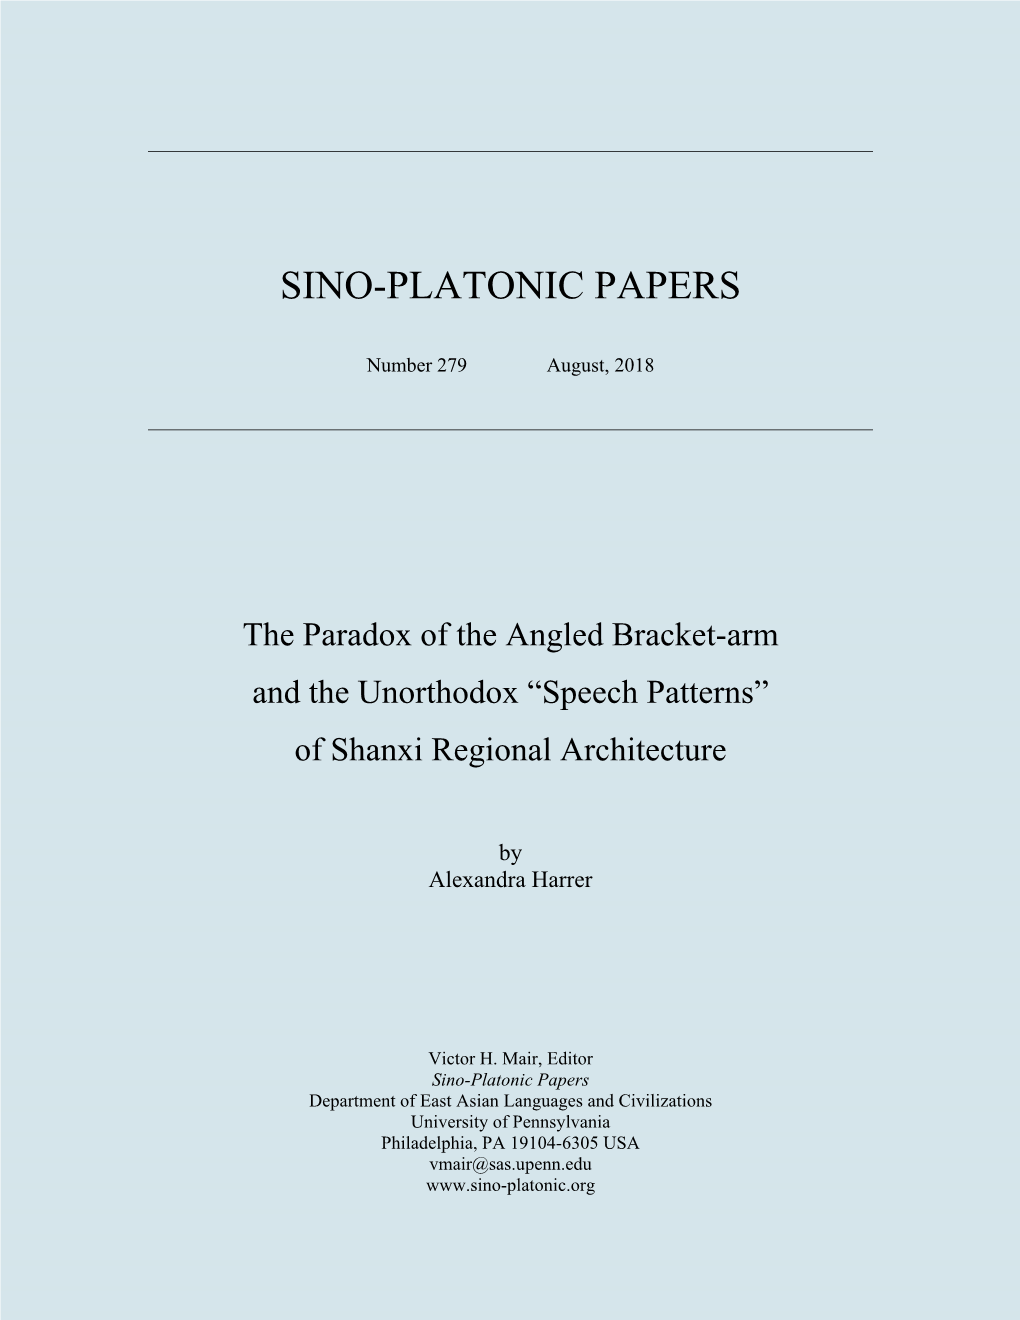 The Paradox of the Angled Bracket-Arm and the Unorthodox “Speech Patterns” of Shanxi Regional Architecture